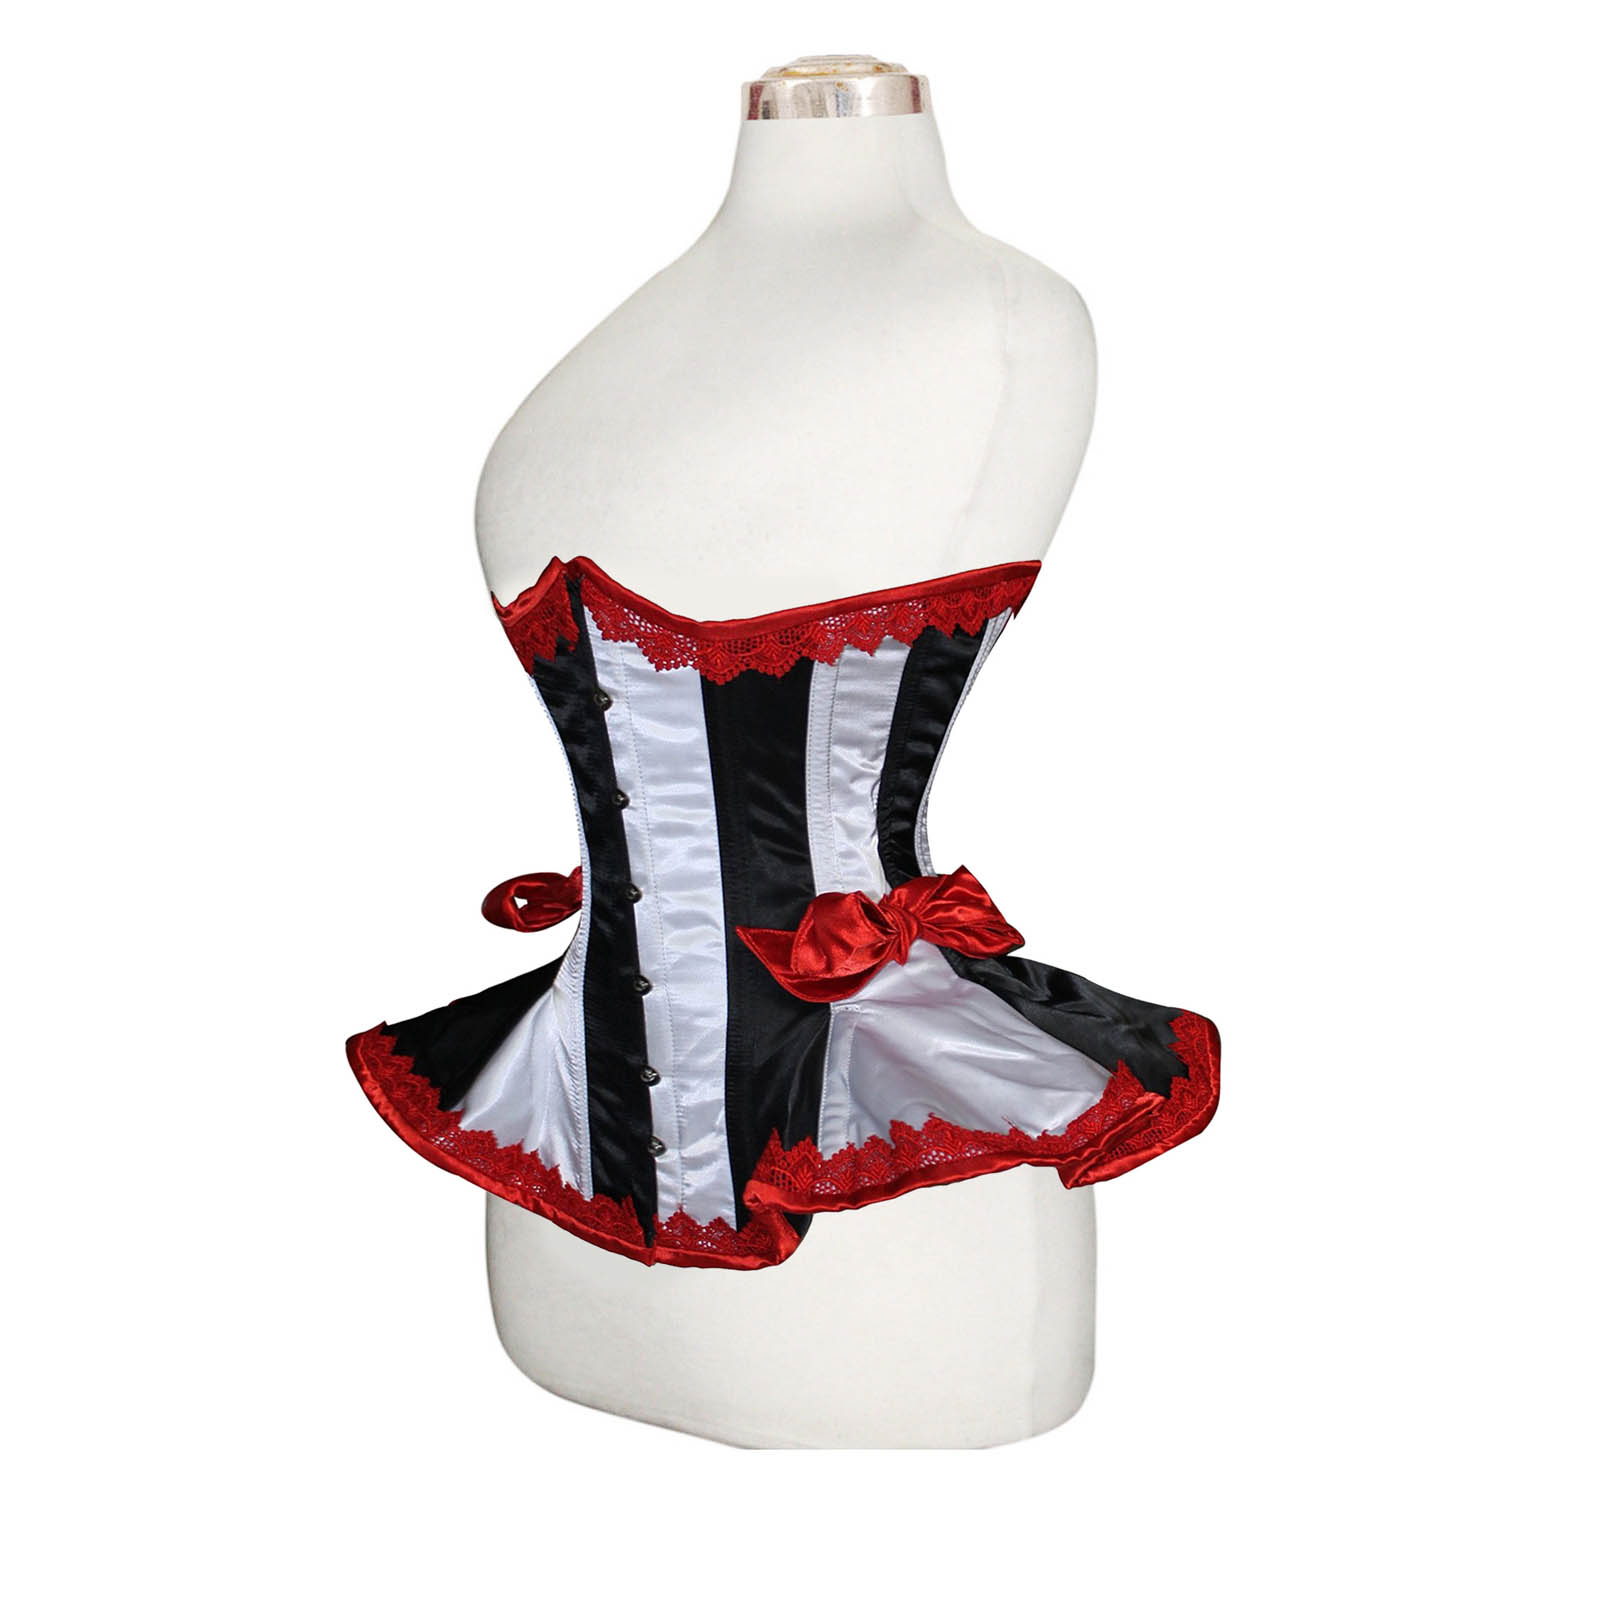 Styling Corsets 2: in Pictures